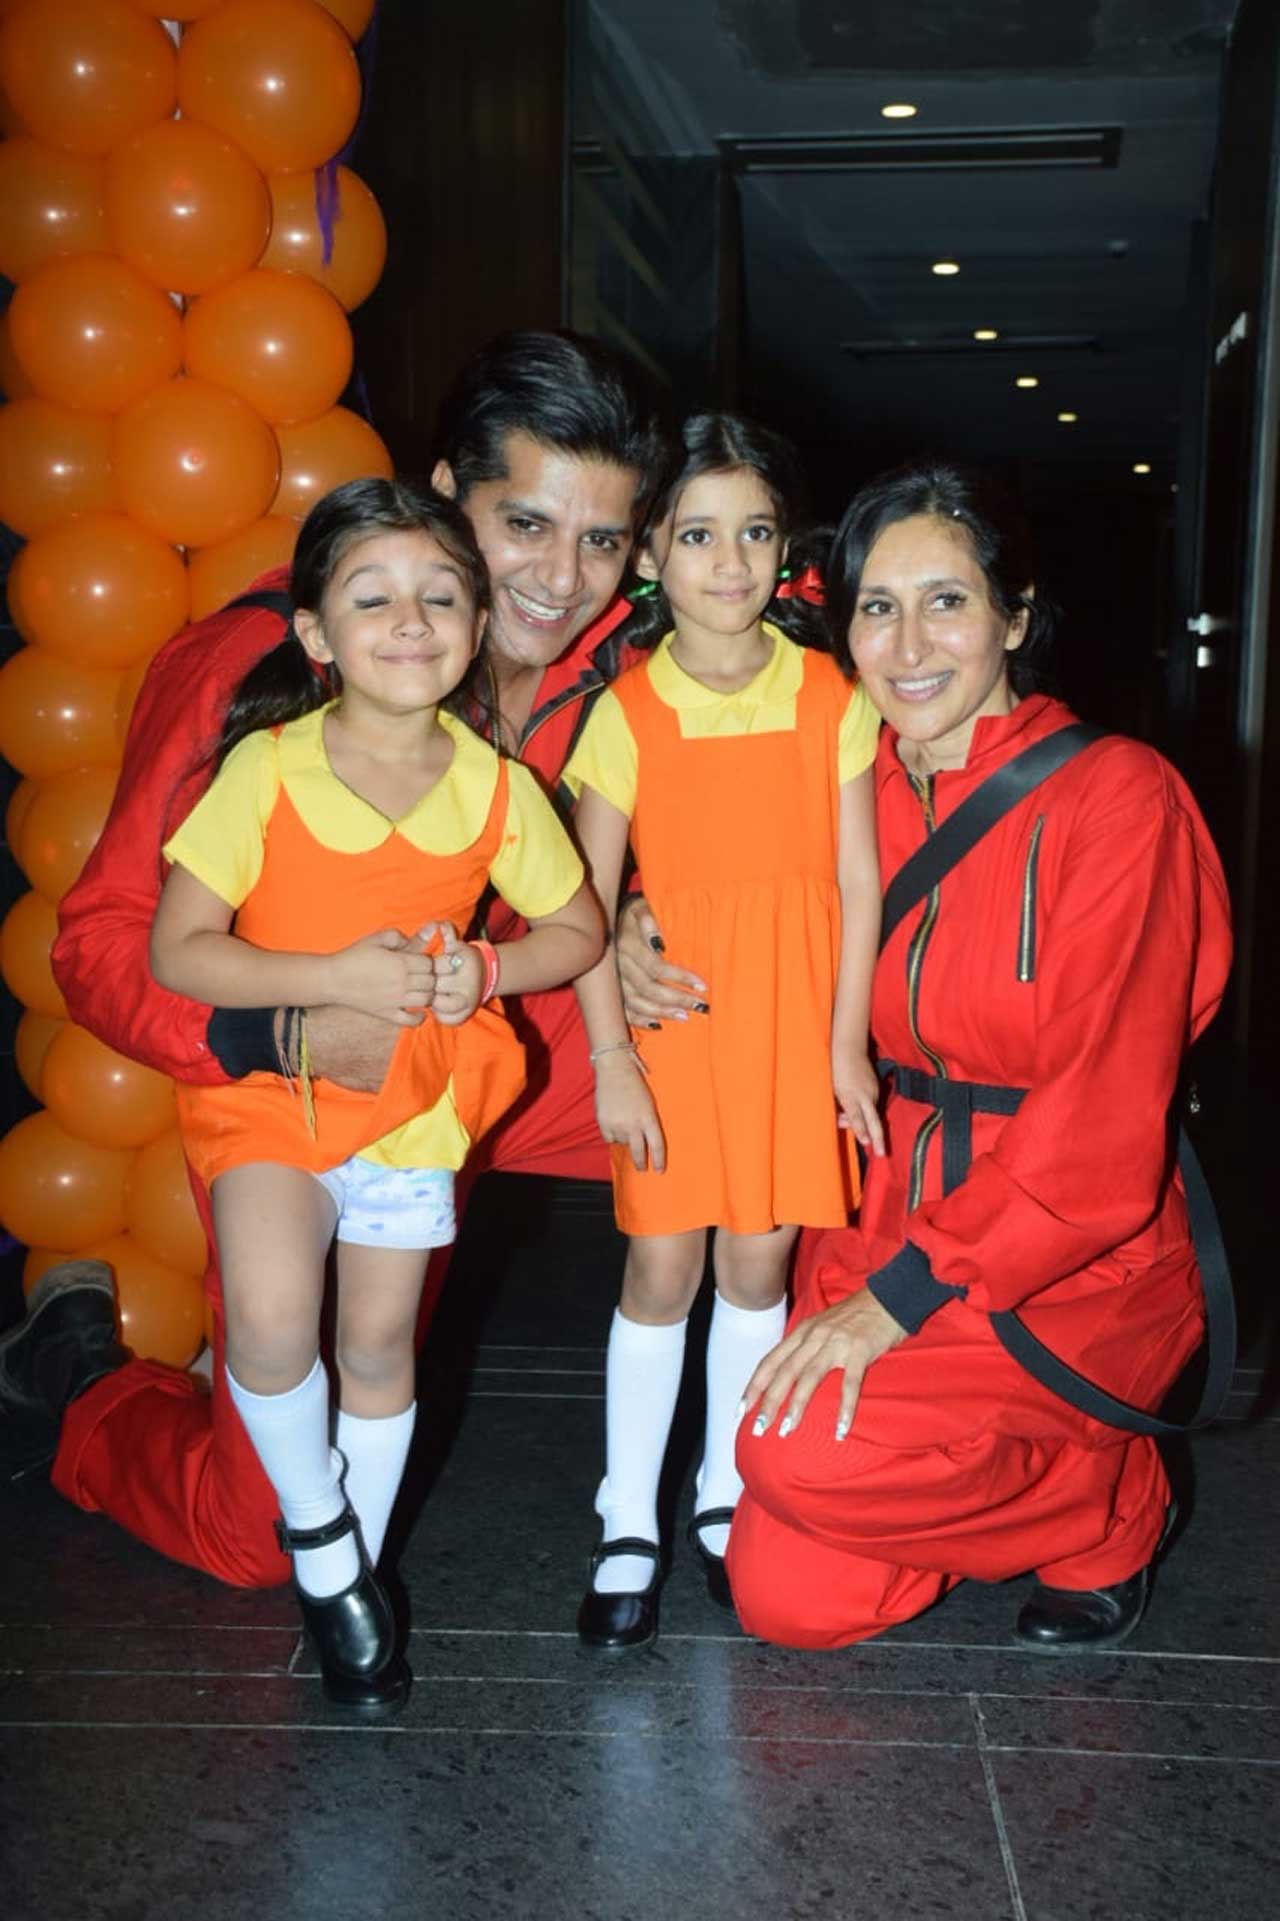 Karanvir Bohra and Teejay Sidhu's twin daughters Bella and Vienna turned 5 in October. The proud parents hosted a unique birthday bash for the kids. The theme of the party was Squid Game, Netflix's most popular Korean drama. Karanvir and Teejay dressed up as the guards while Bella and Vienna dressed up as the doll in Red Light Green Light game.